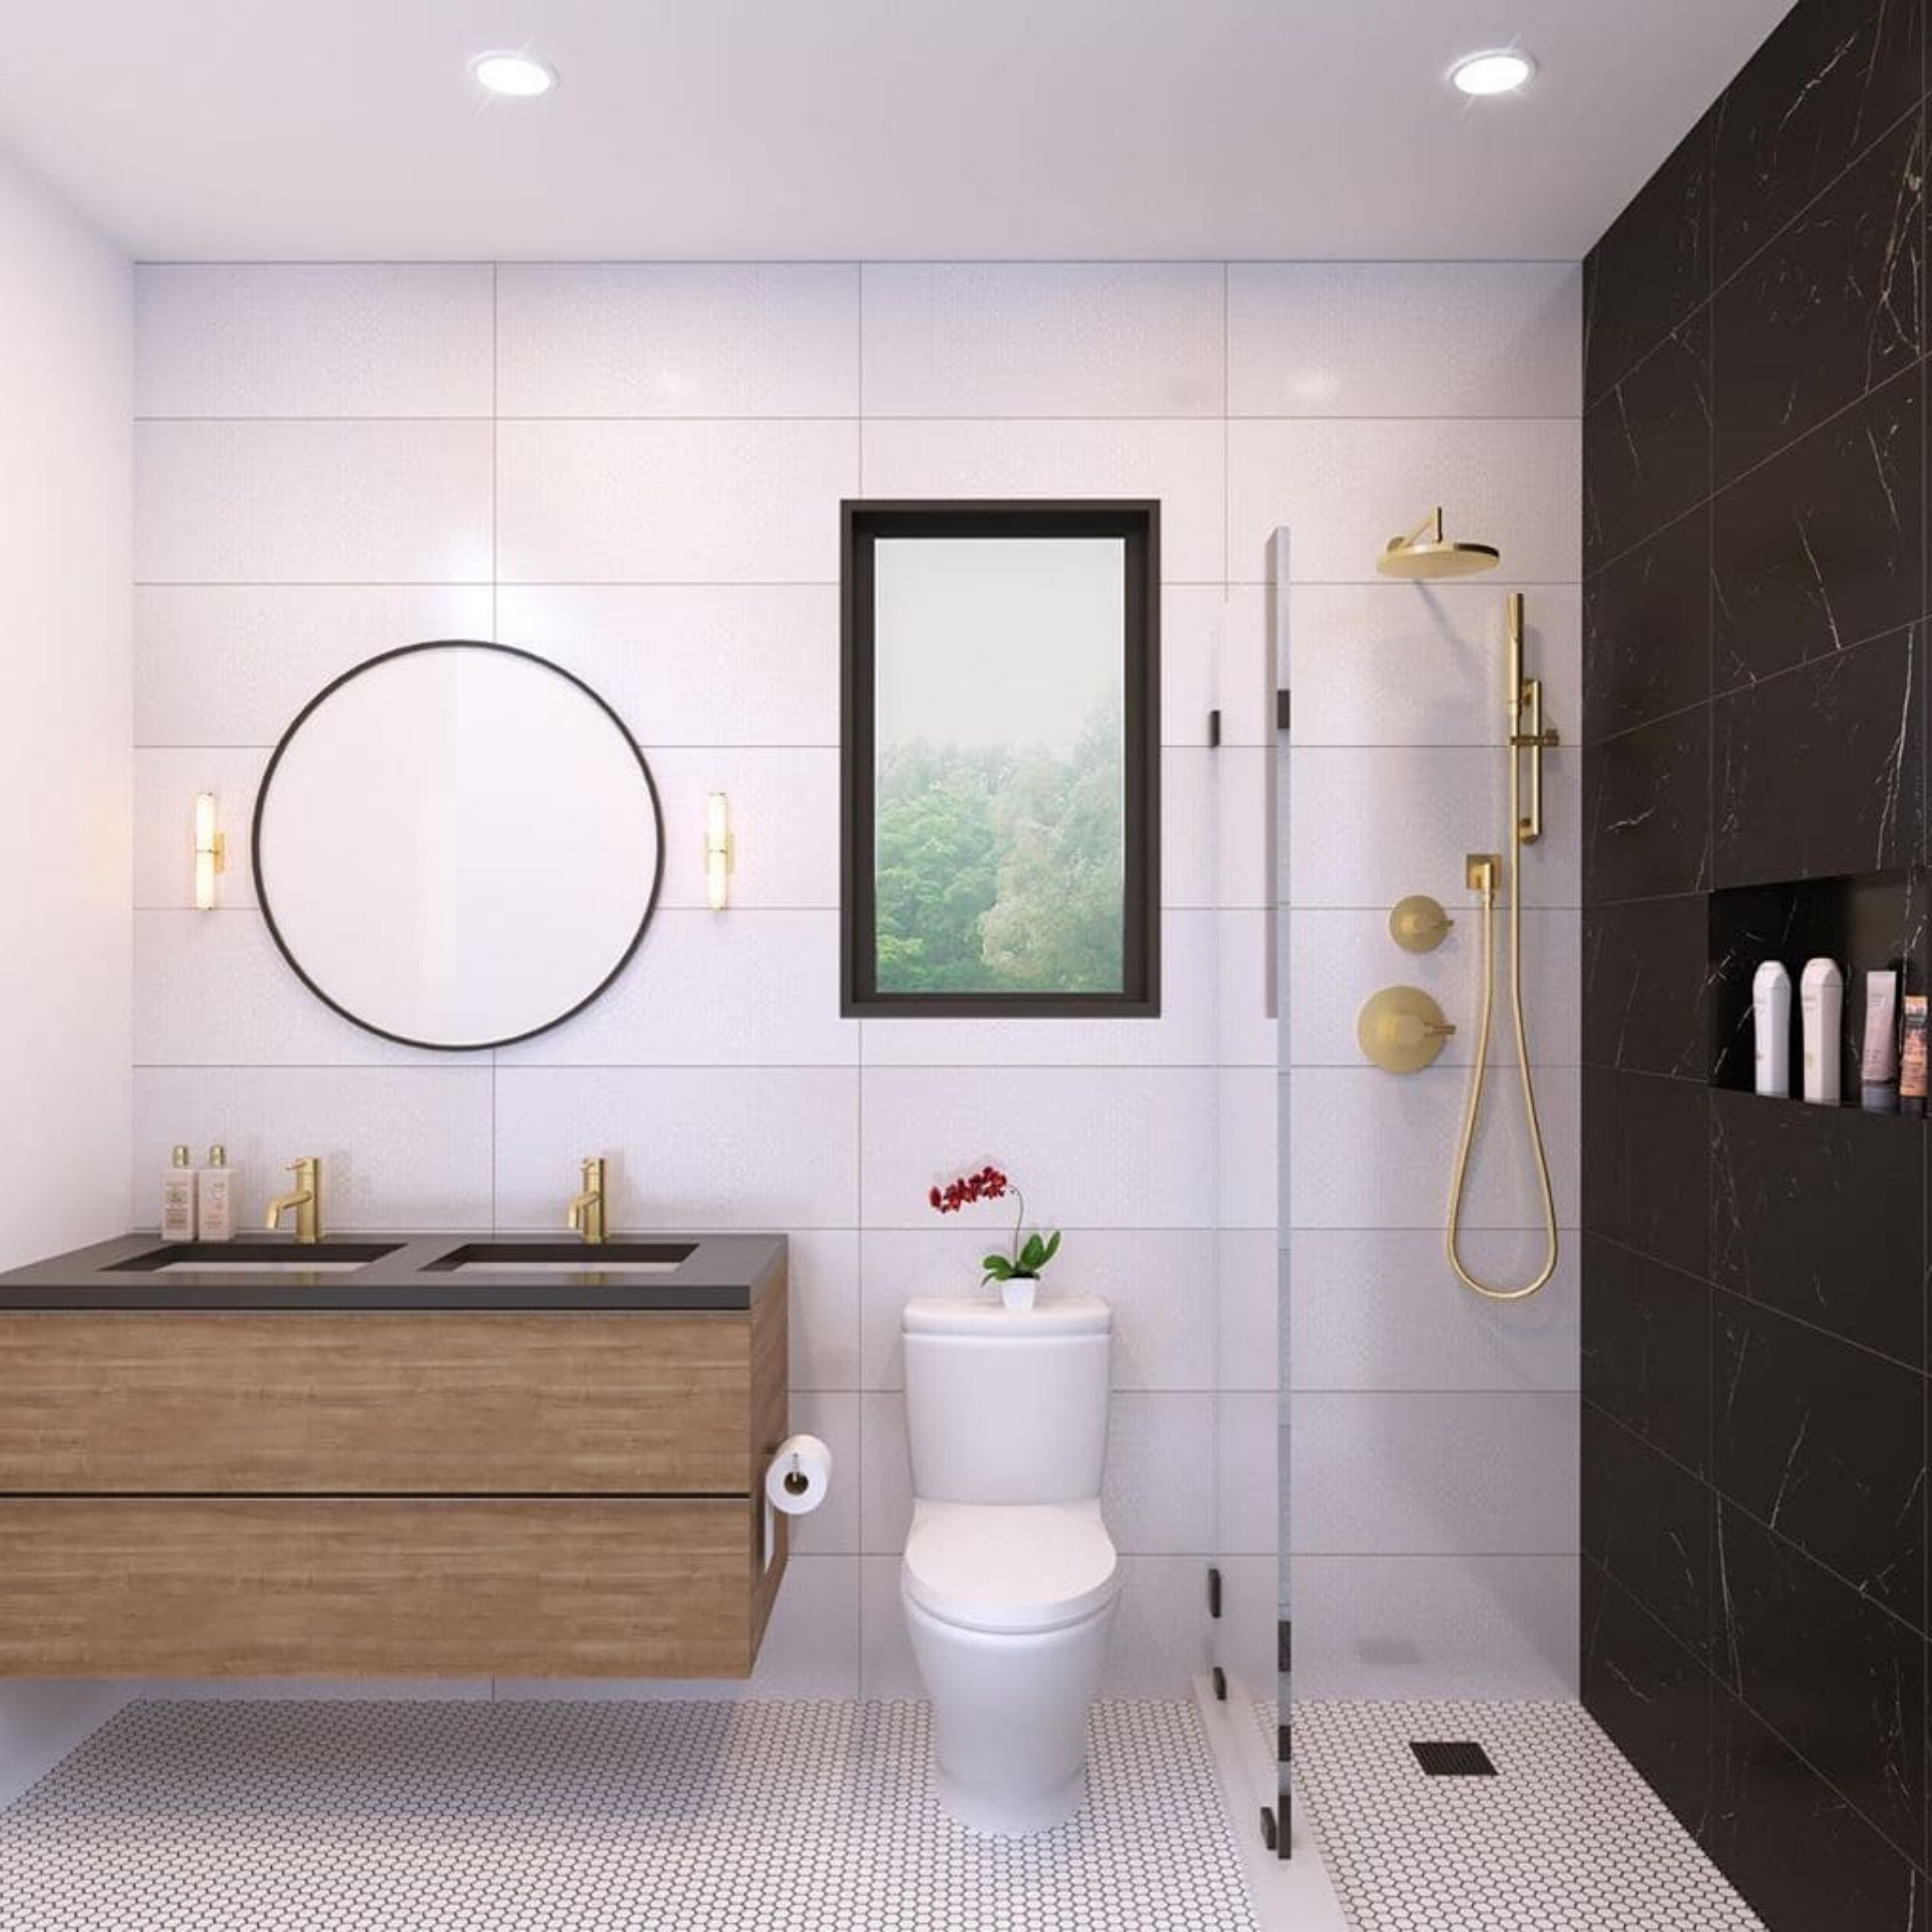 Marble Tech Port Laurent 12x24 Polished Nero Marquina Look Porcelain Tile shown with the Eden White 3/4" Penny Round Polished Ceramic Tile in a bathroom. 